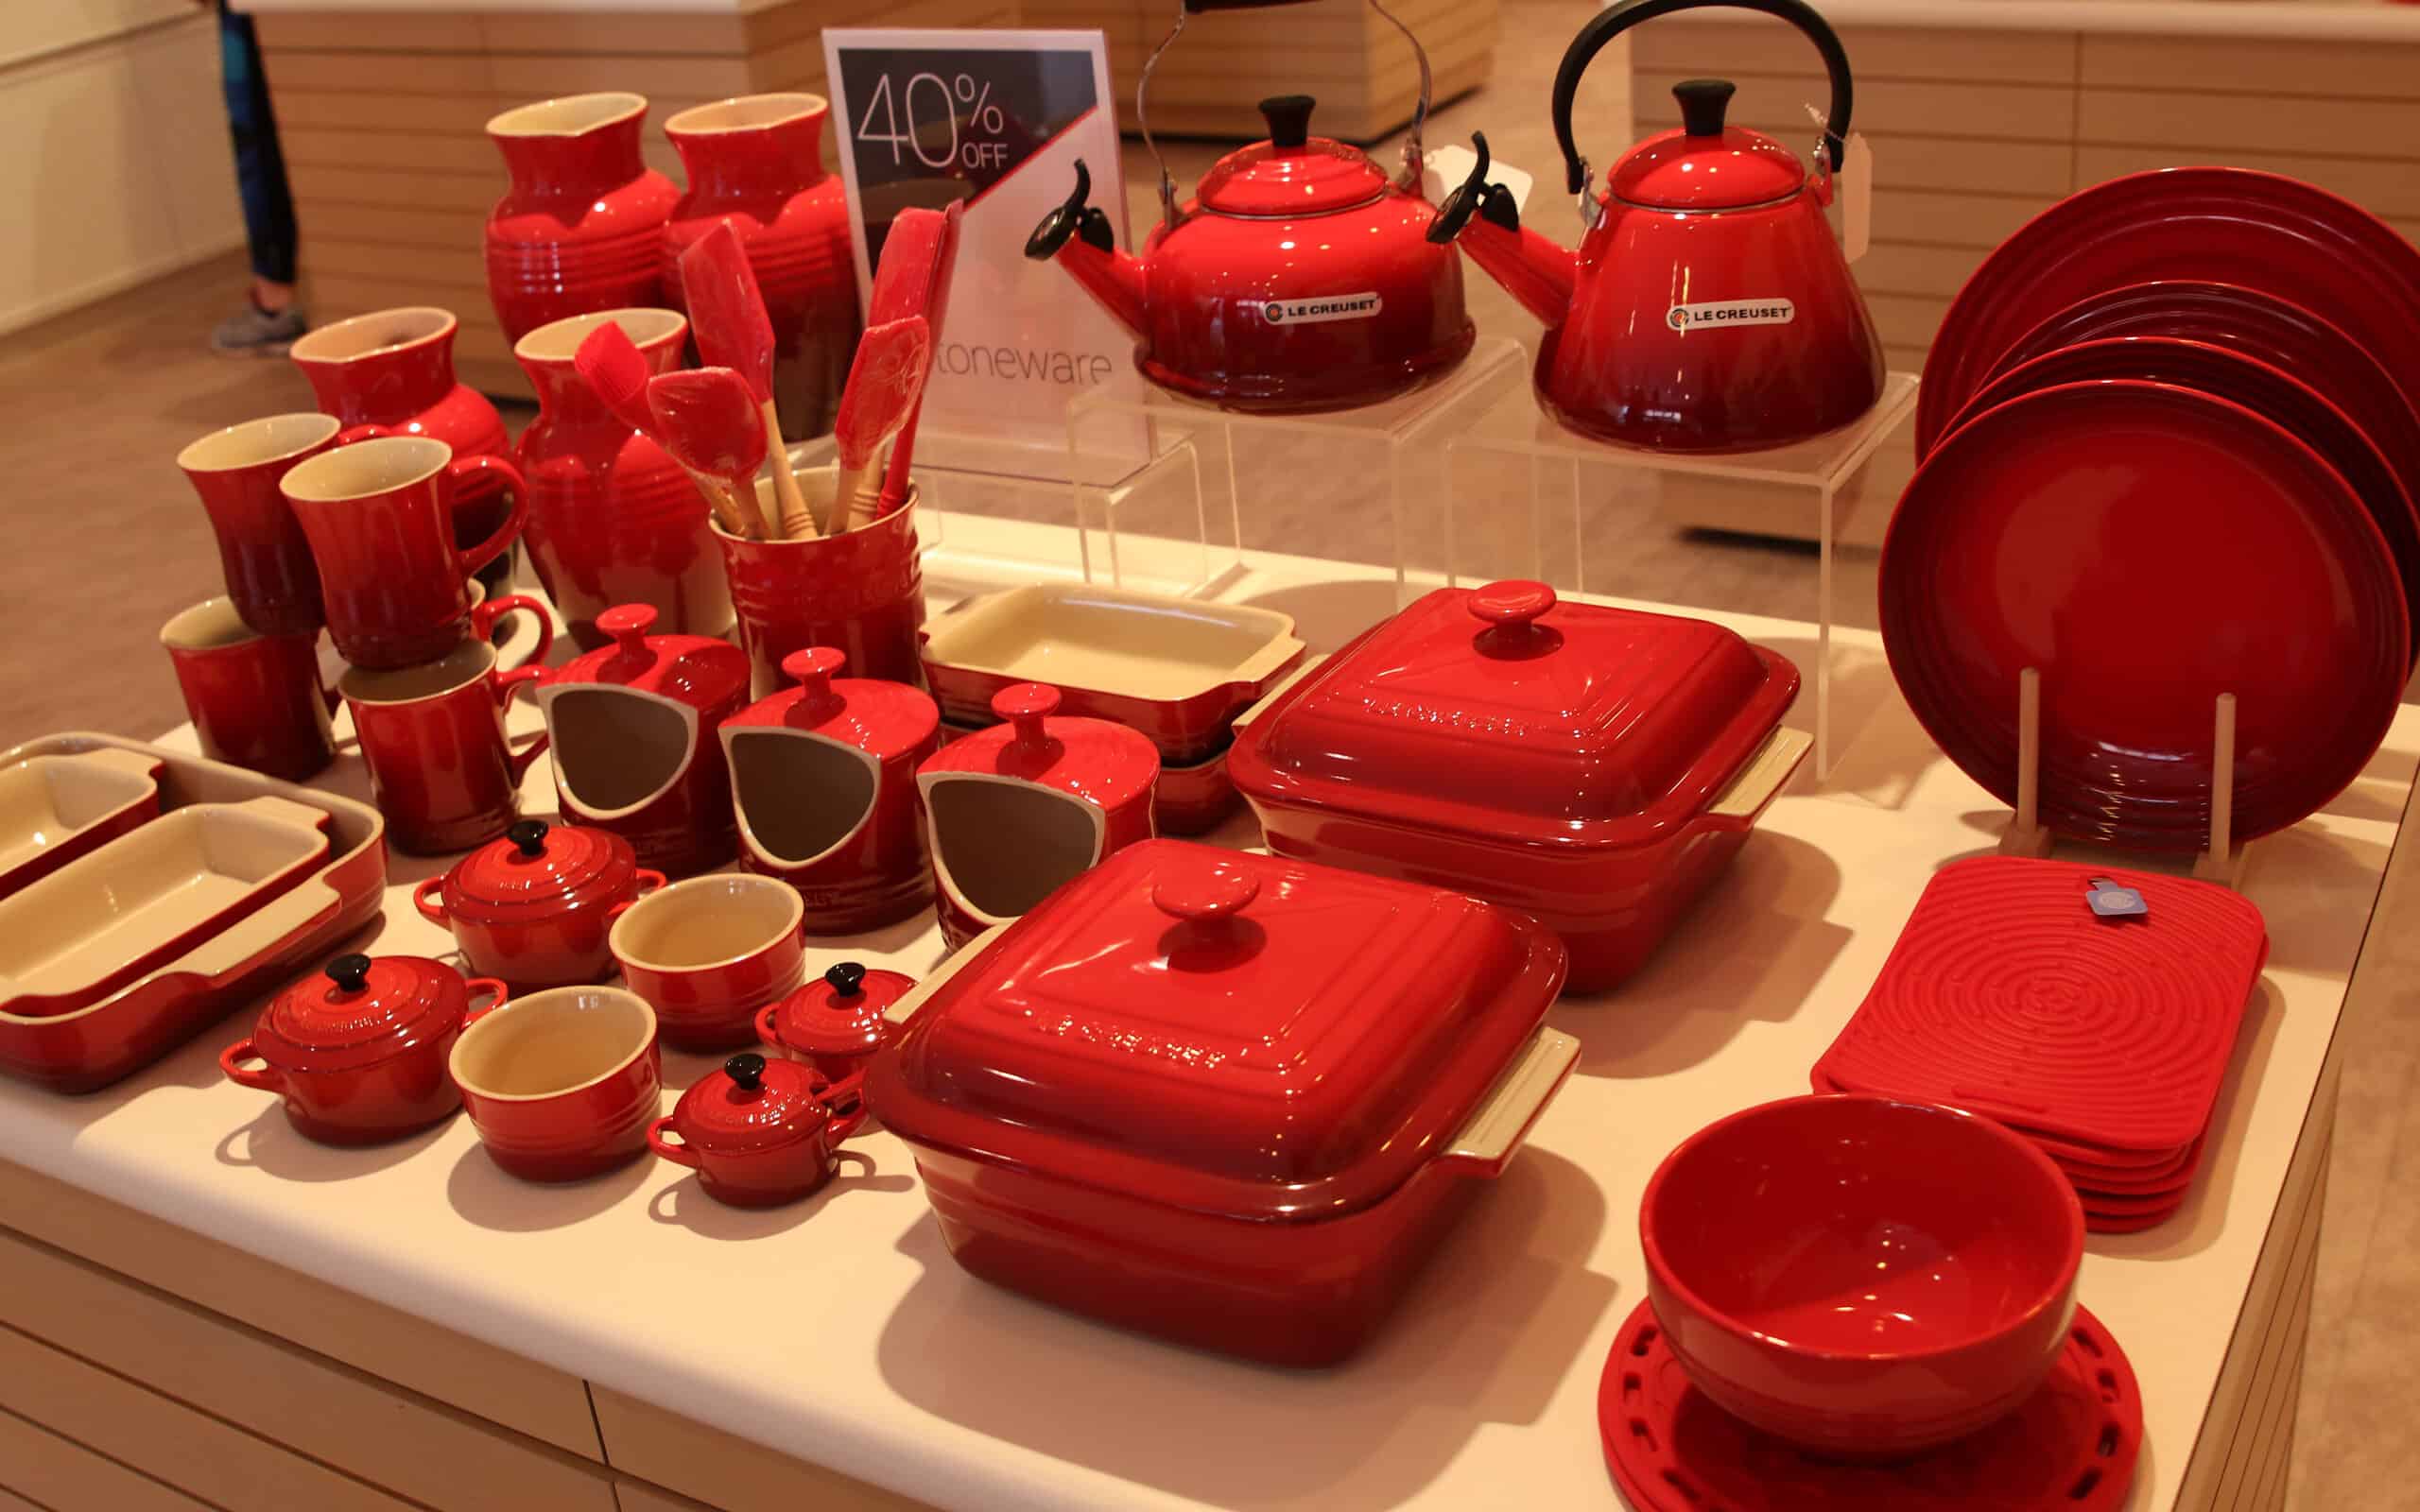 Costco Just Announced a Huge Le Creuset Set Now in Stock